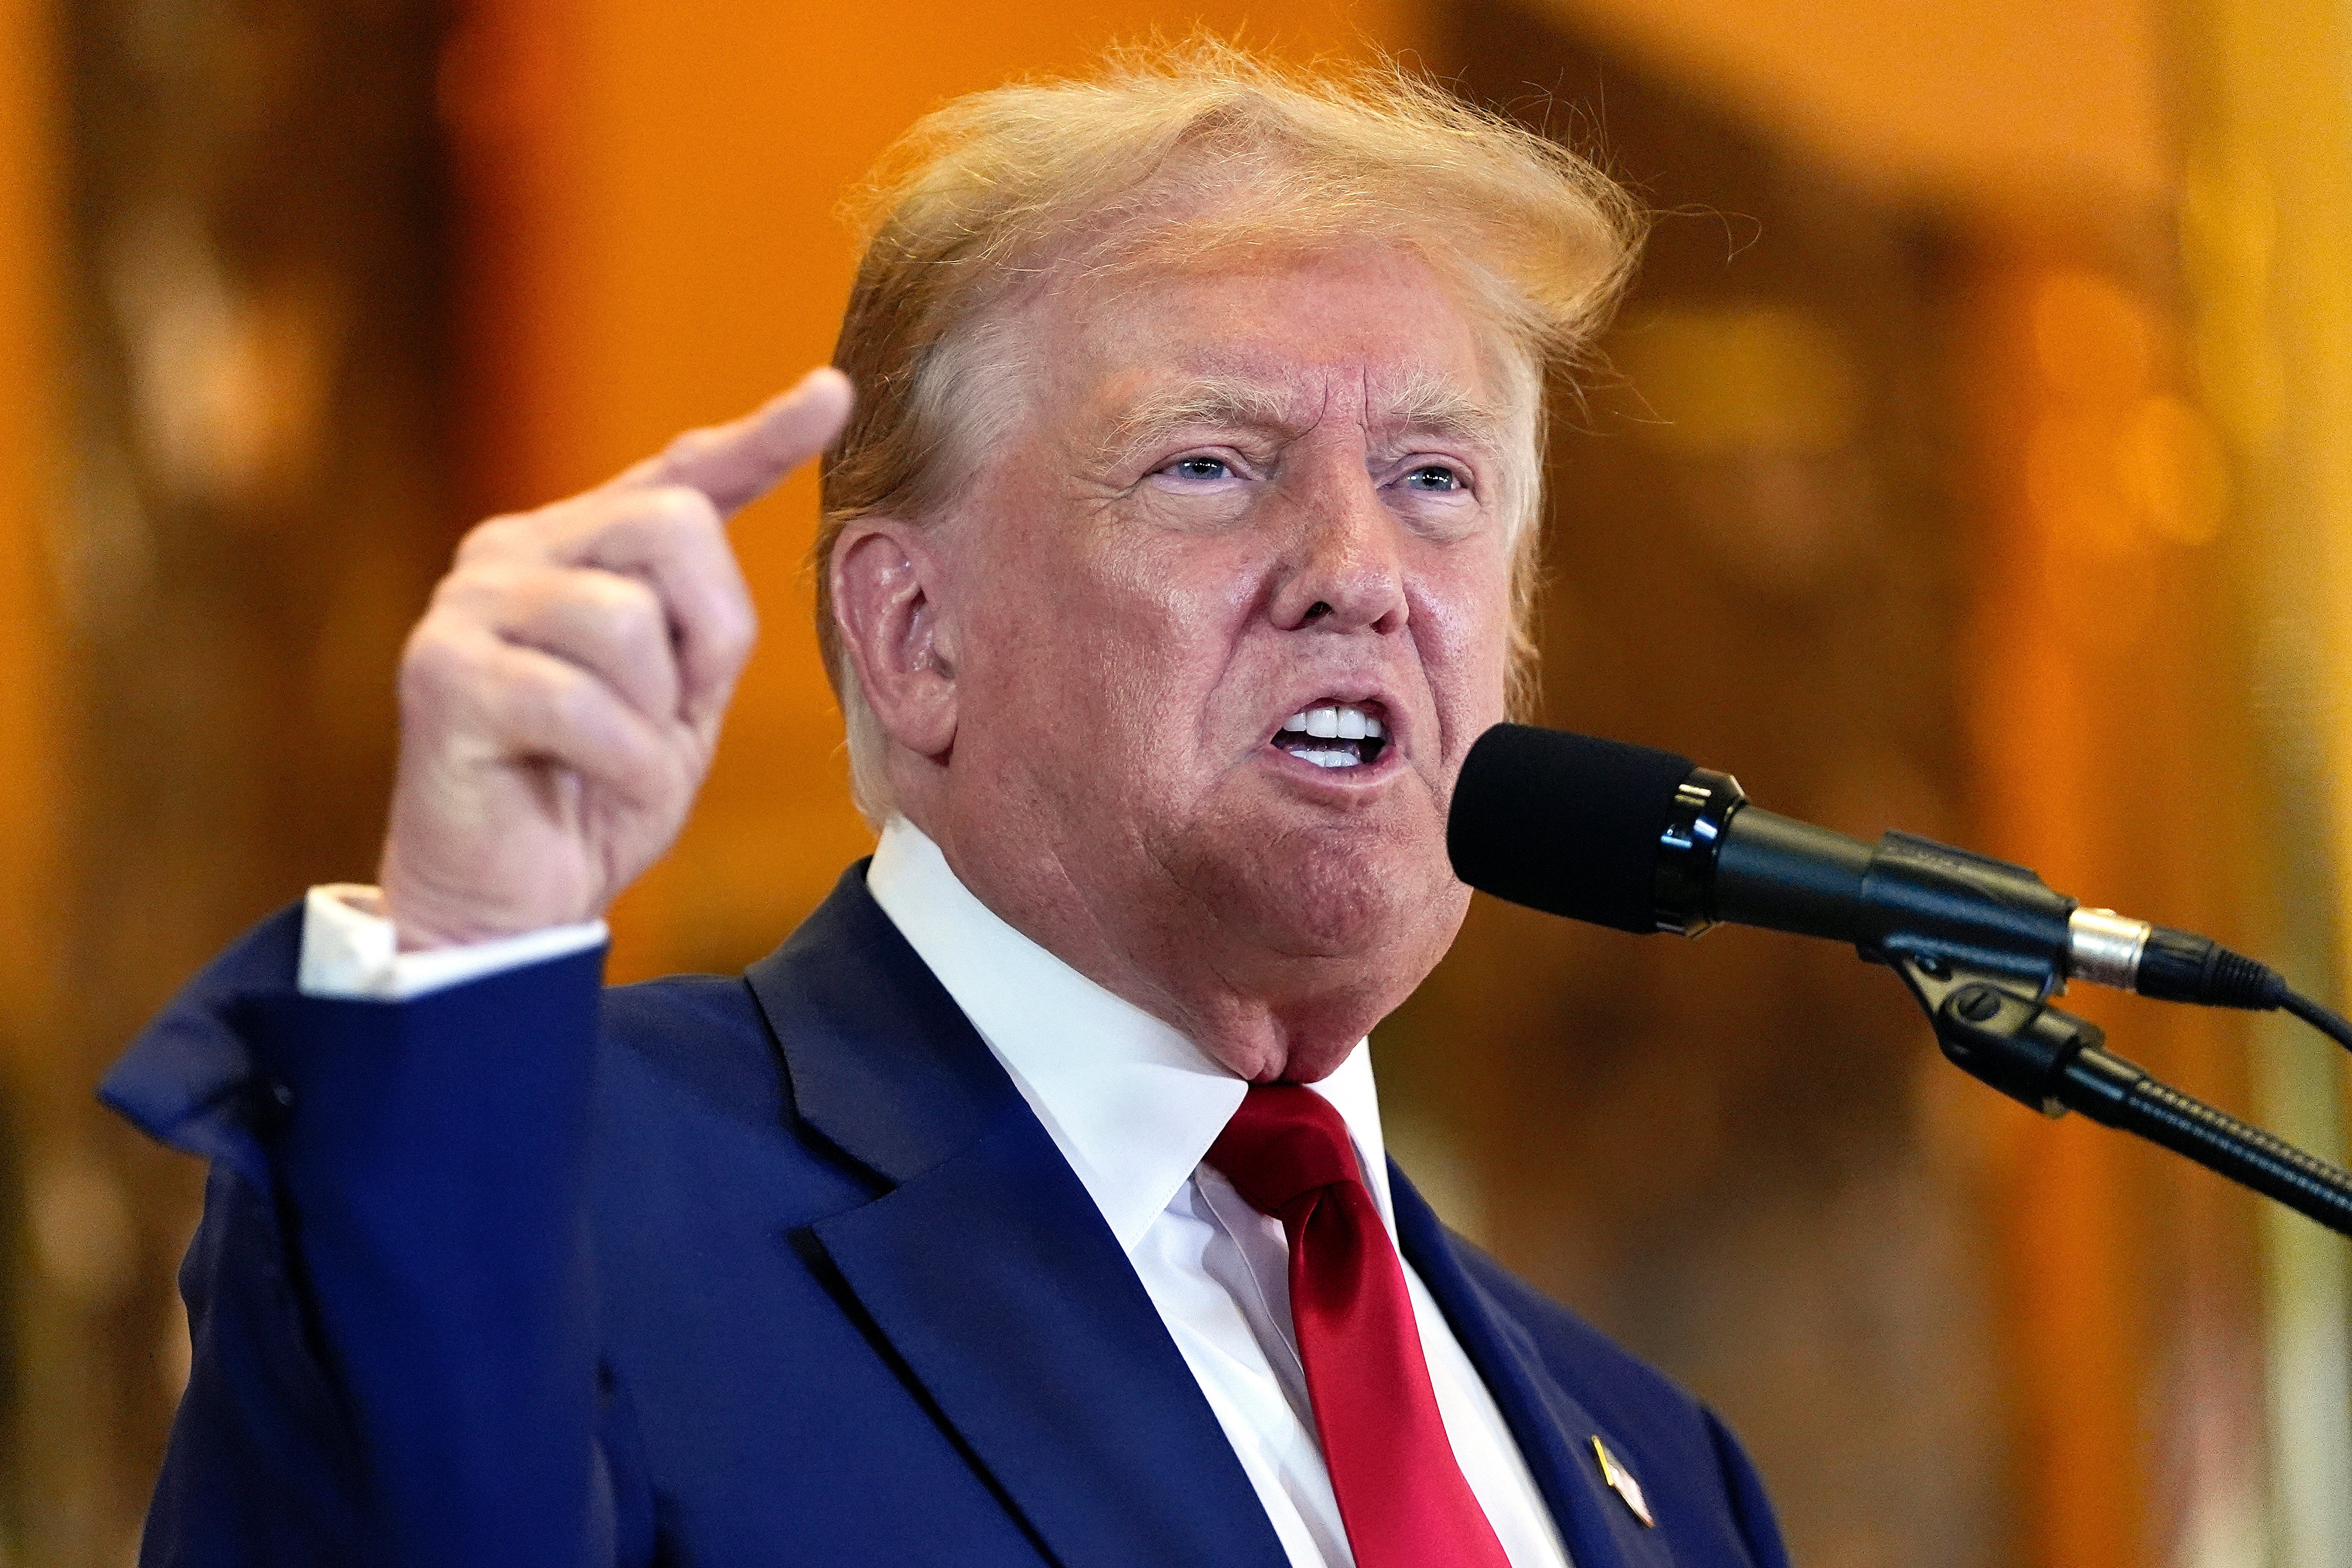 Donald Trump speaks during a news conference at Trump Tower on May 31, the day after a jury found him guilty on 34 charges connected to a hush money scheme to influence the outcome of the 2016 election.